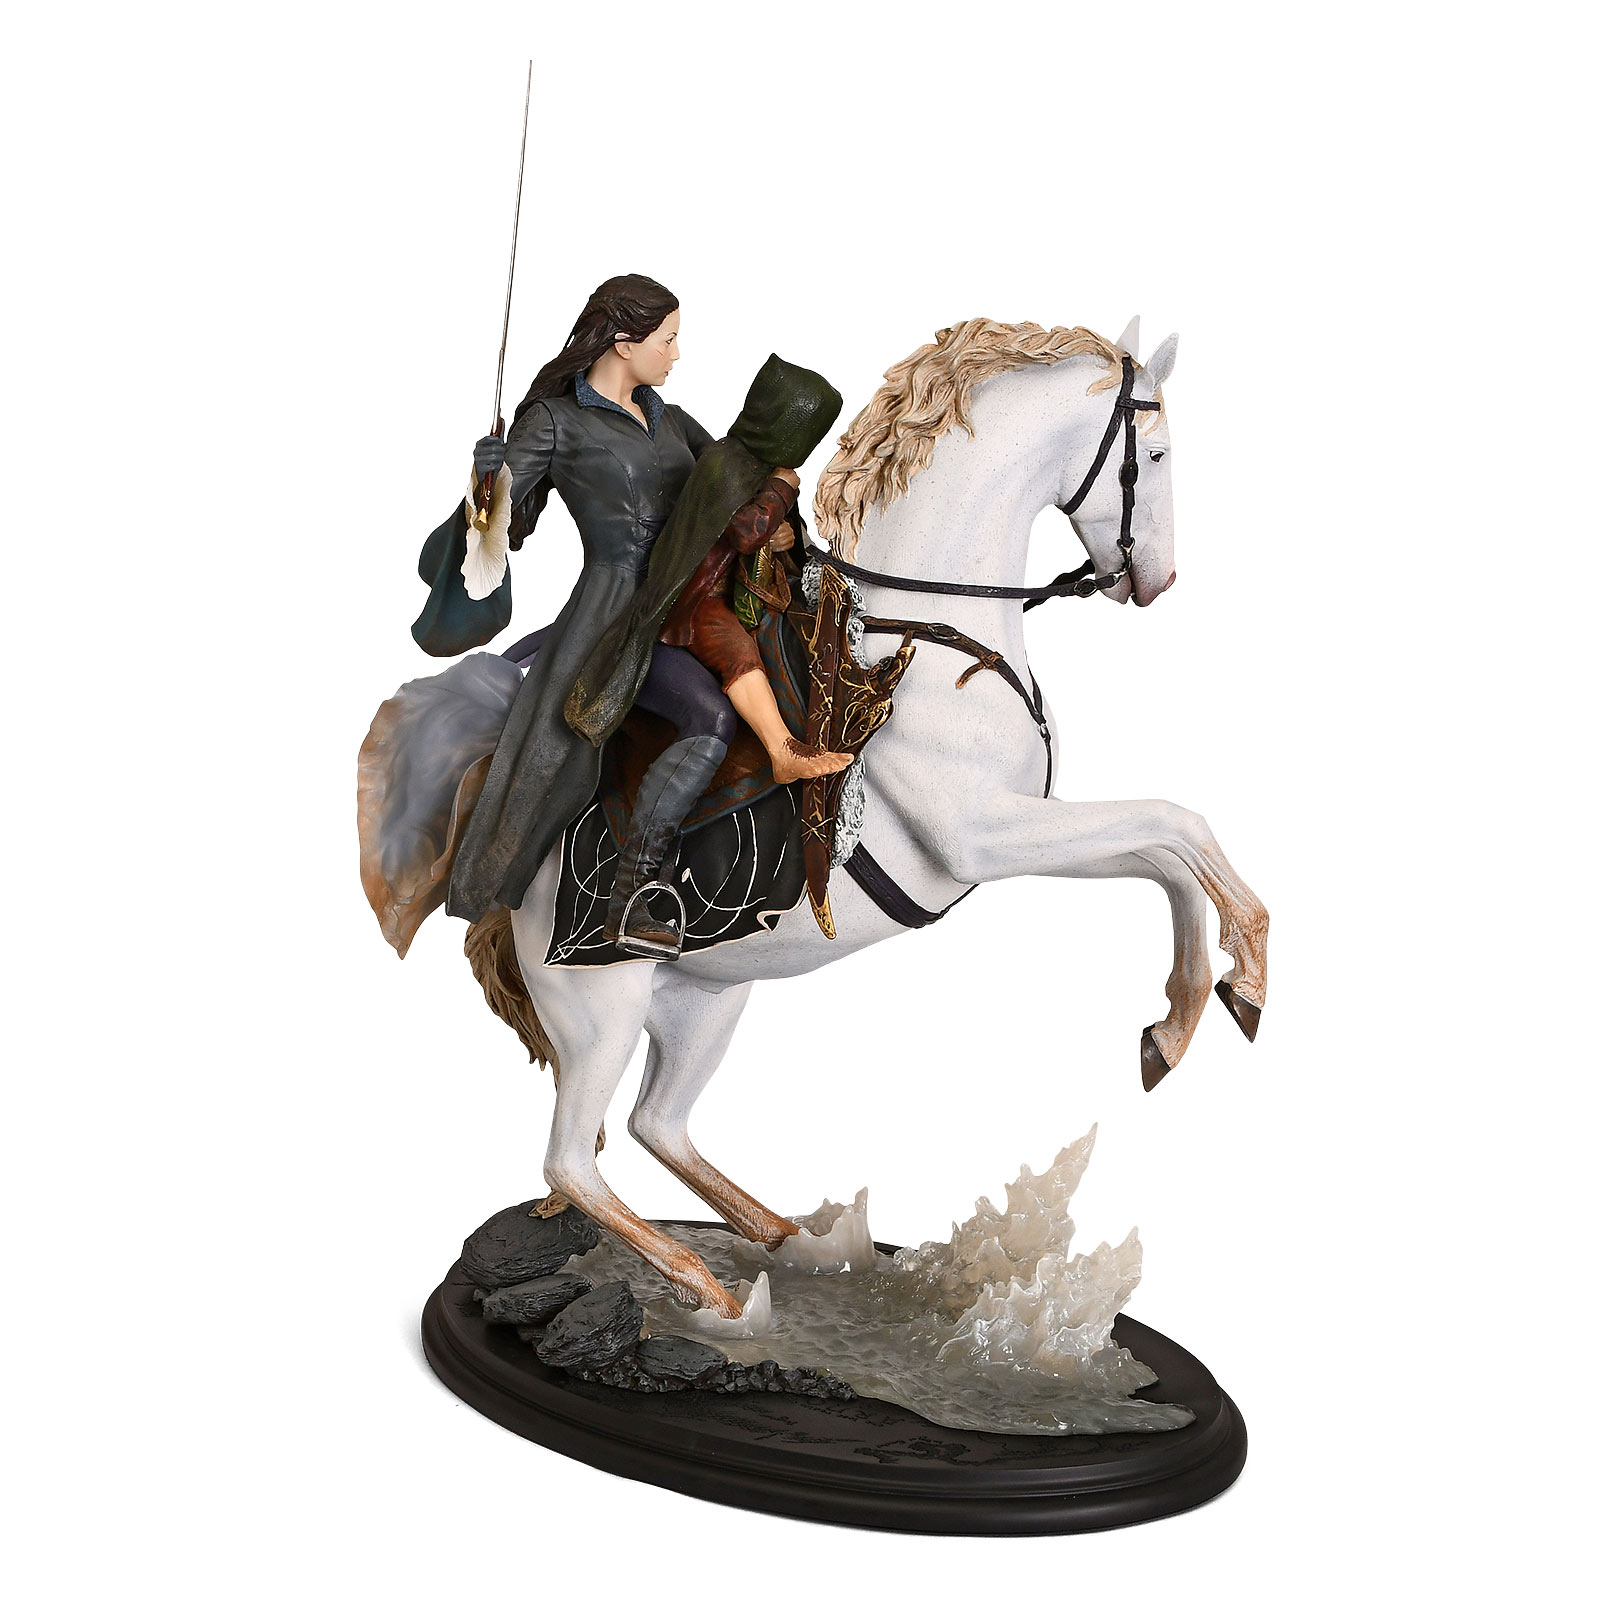 Lord of the Rings - Arwen & Frodo on Asfaloth Figure 48 cm deluxe